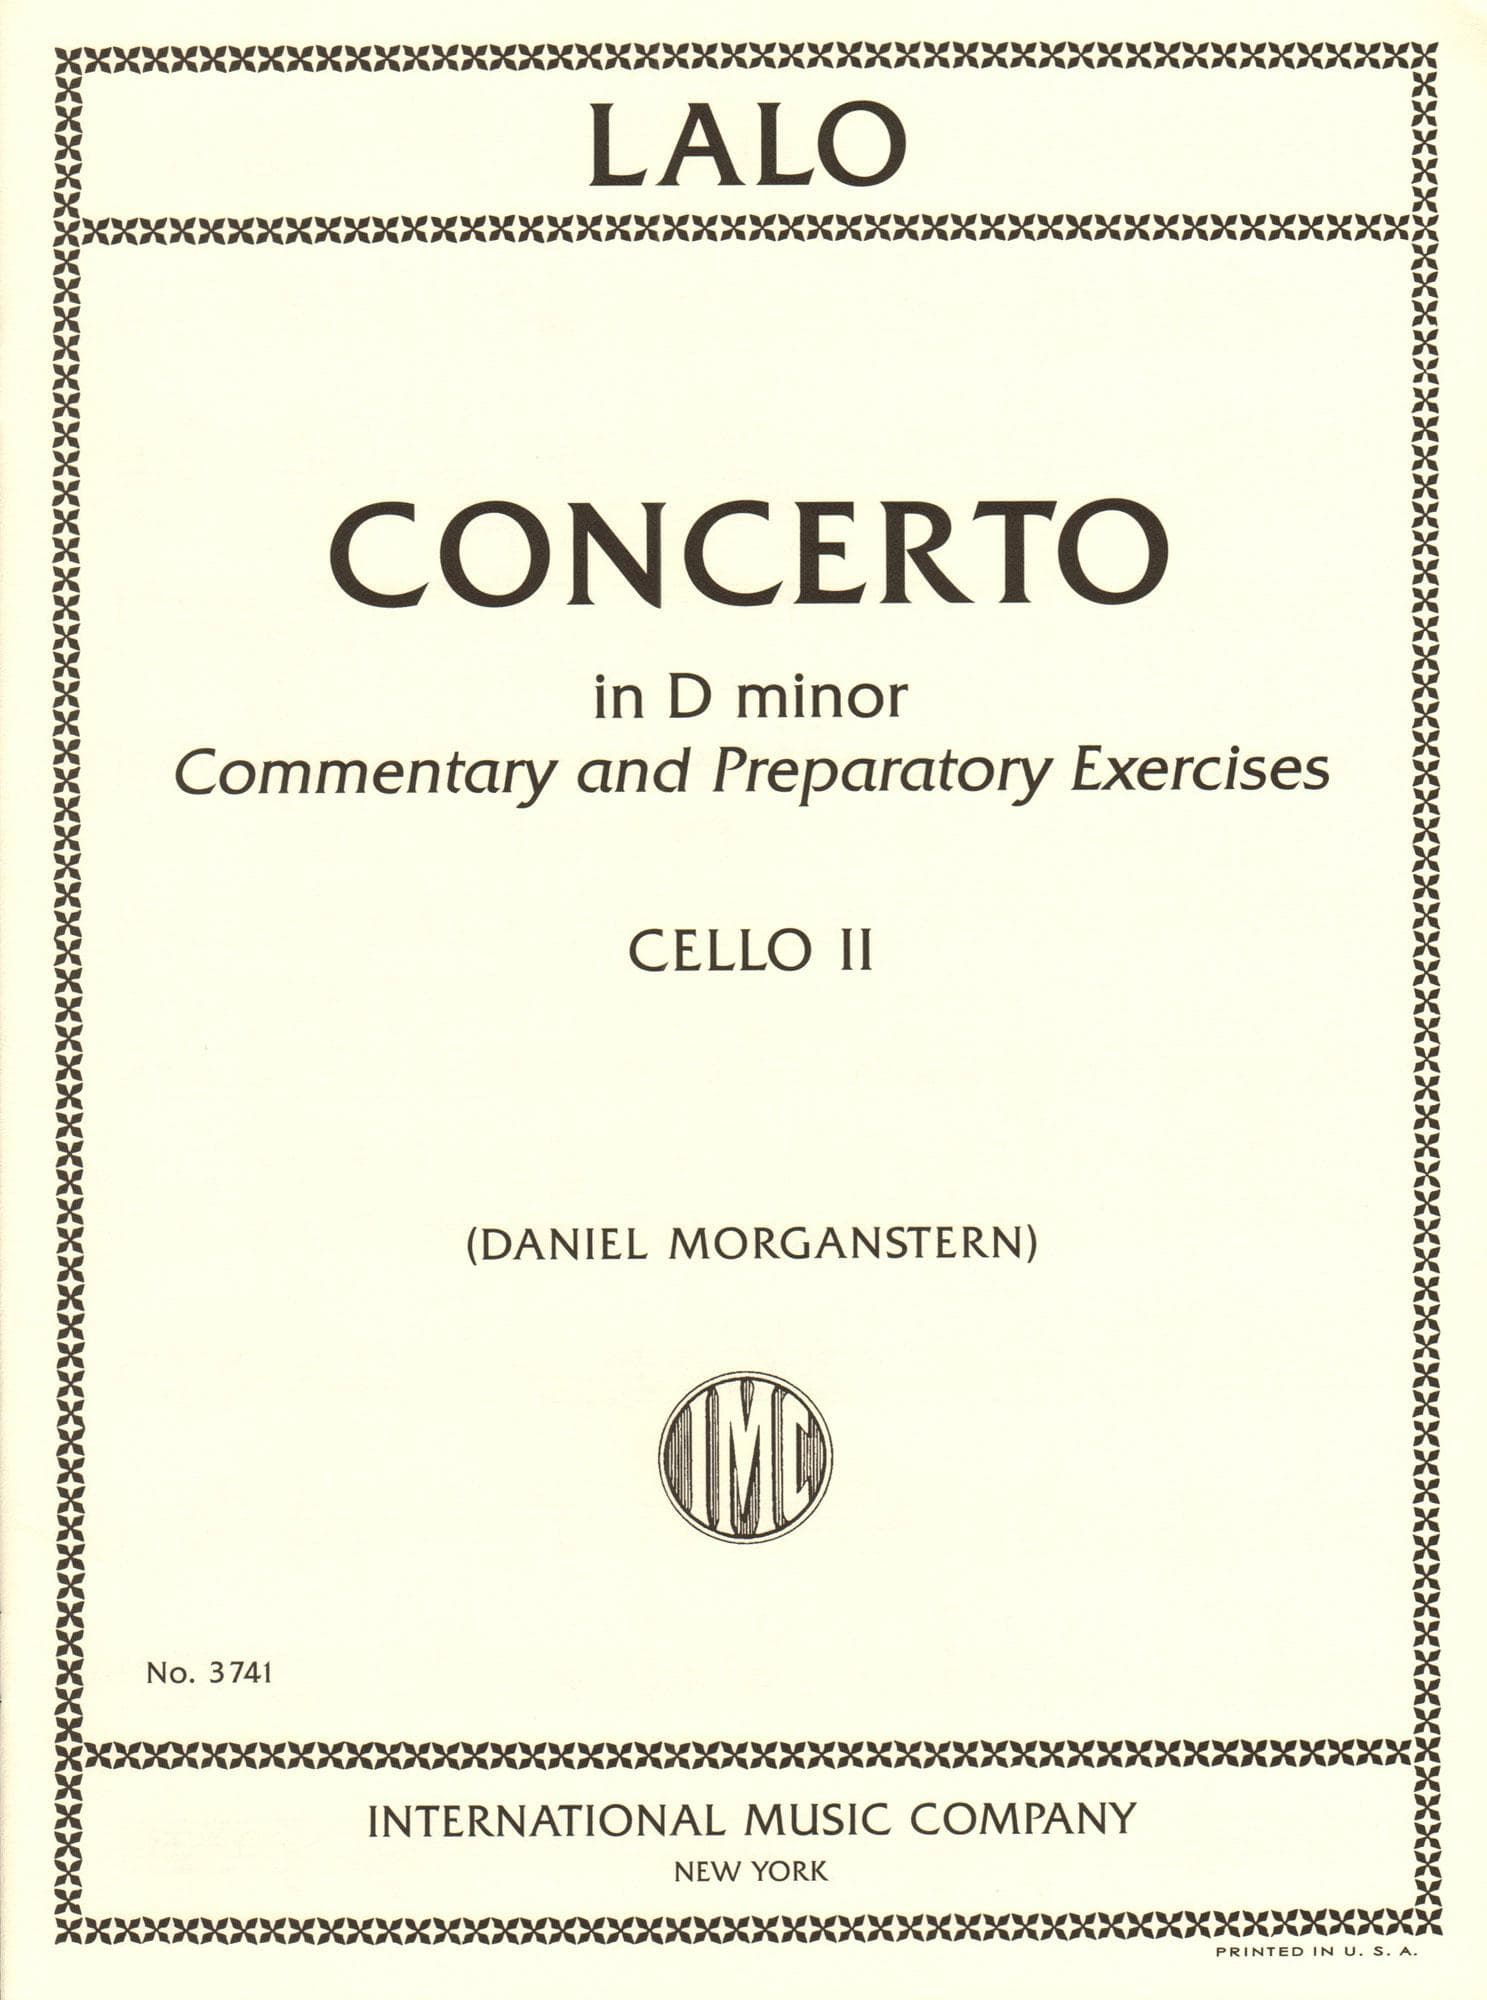 Lalo, Edouard - Concerto in D minor - for Cello - with Optional 2nd Cello, Commentary and Preparatory Exercises by Daniel Morganstern - International